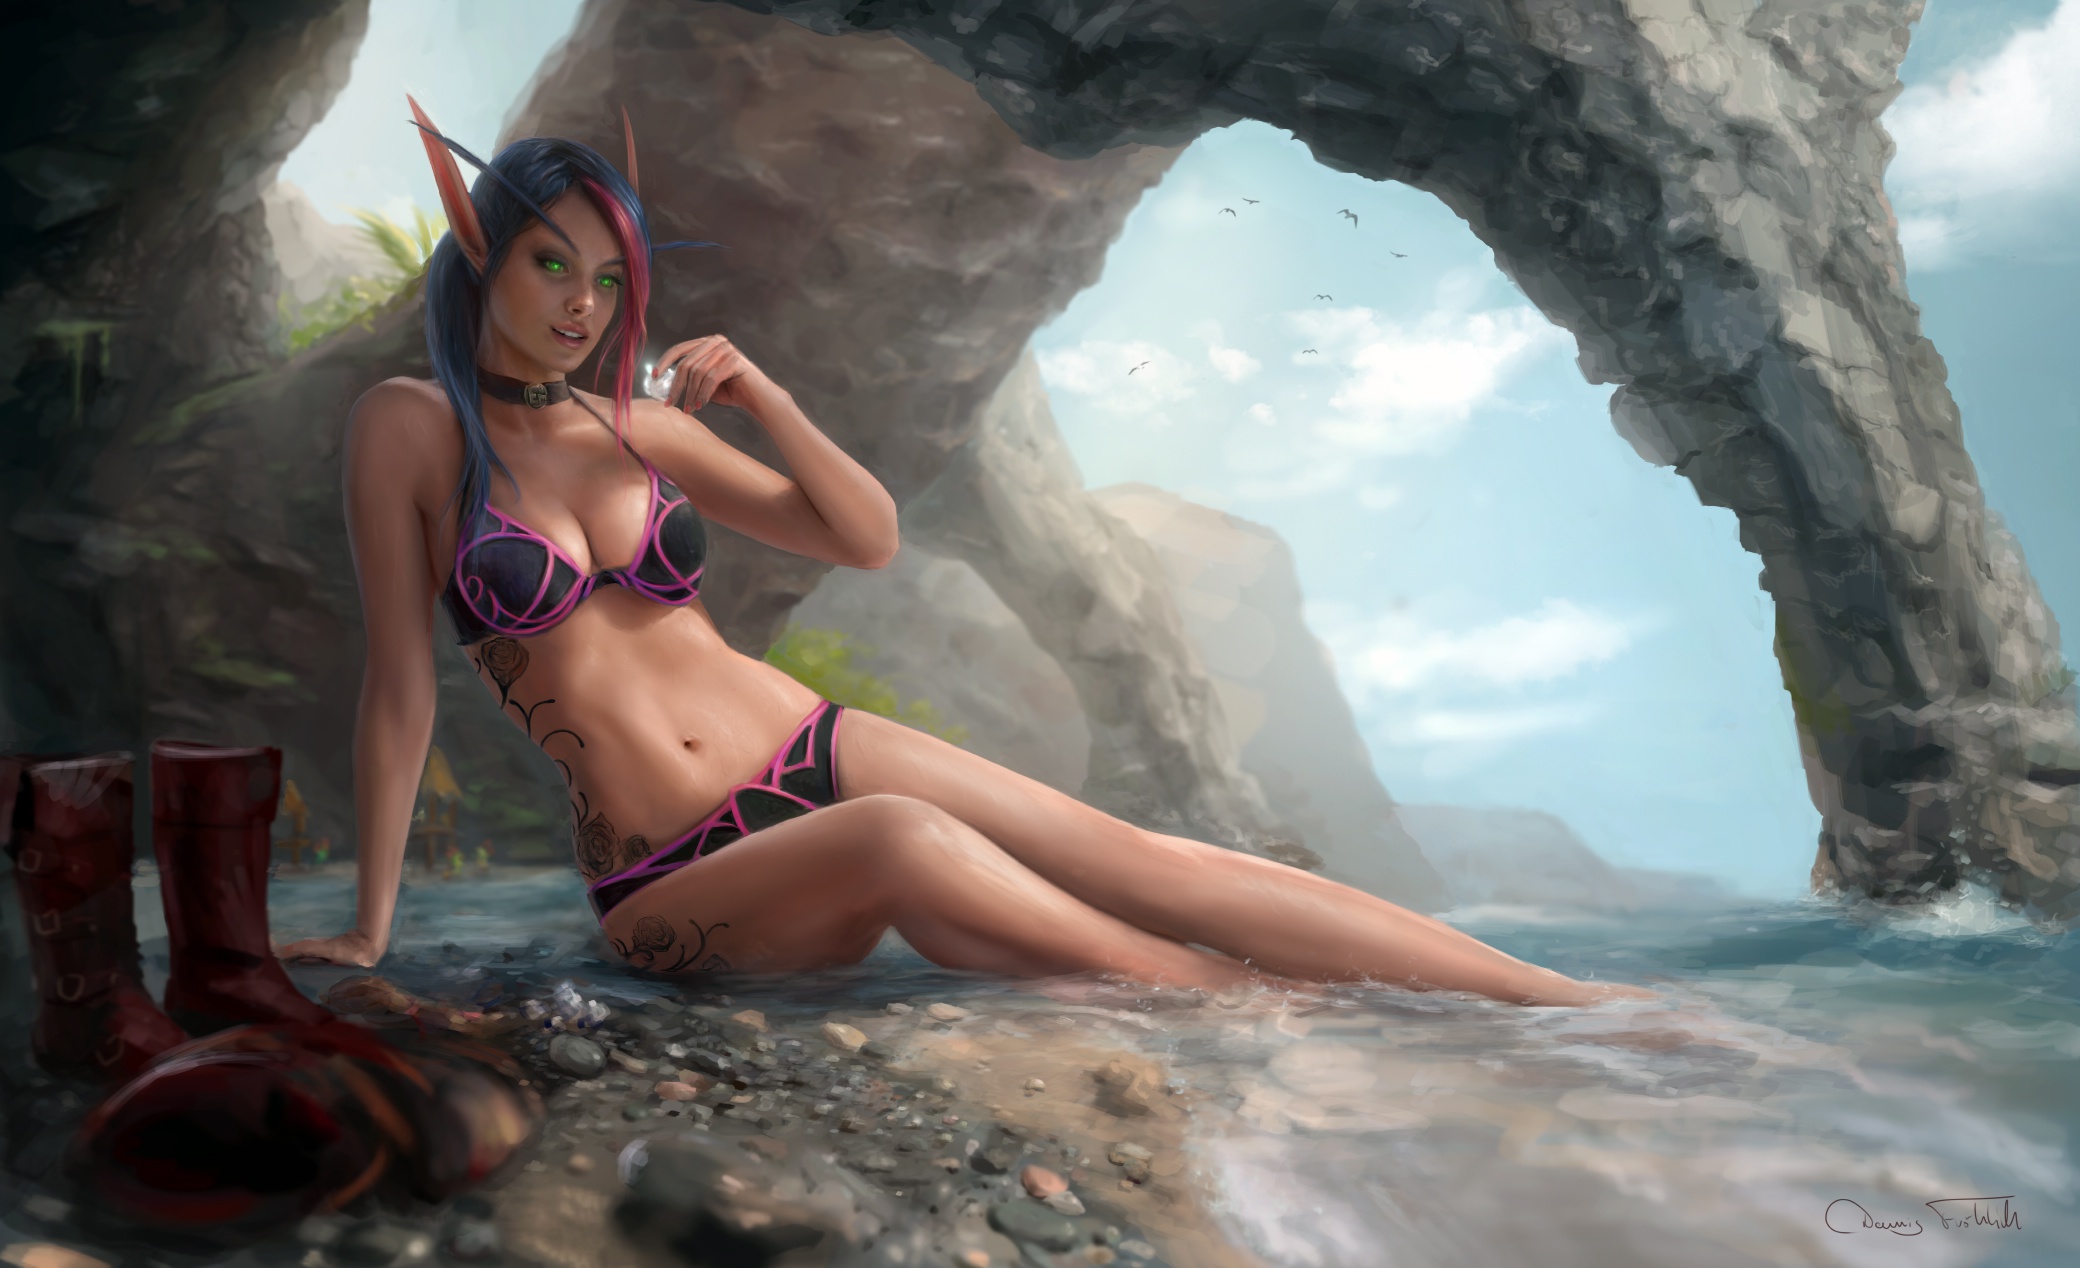 General 2080x1268 World of Warcraft elves pointy ears bikini cleavage tattoo fantasy art fantasy girl artwork belly belly button Dennis Frohlich dyed hair